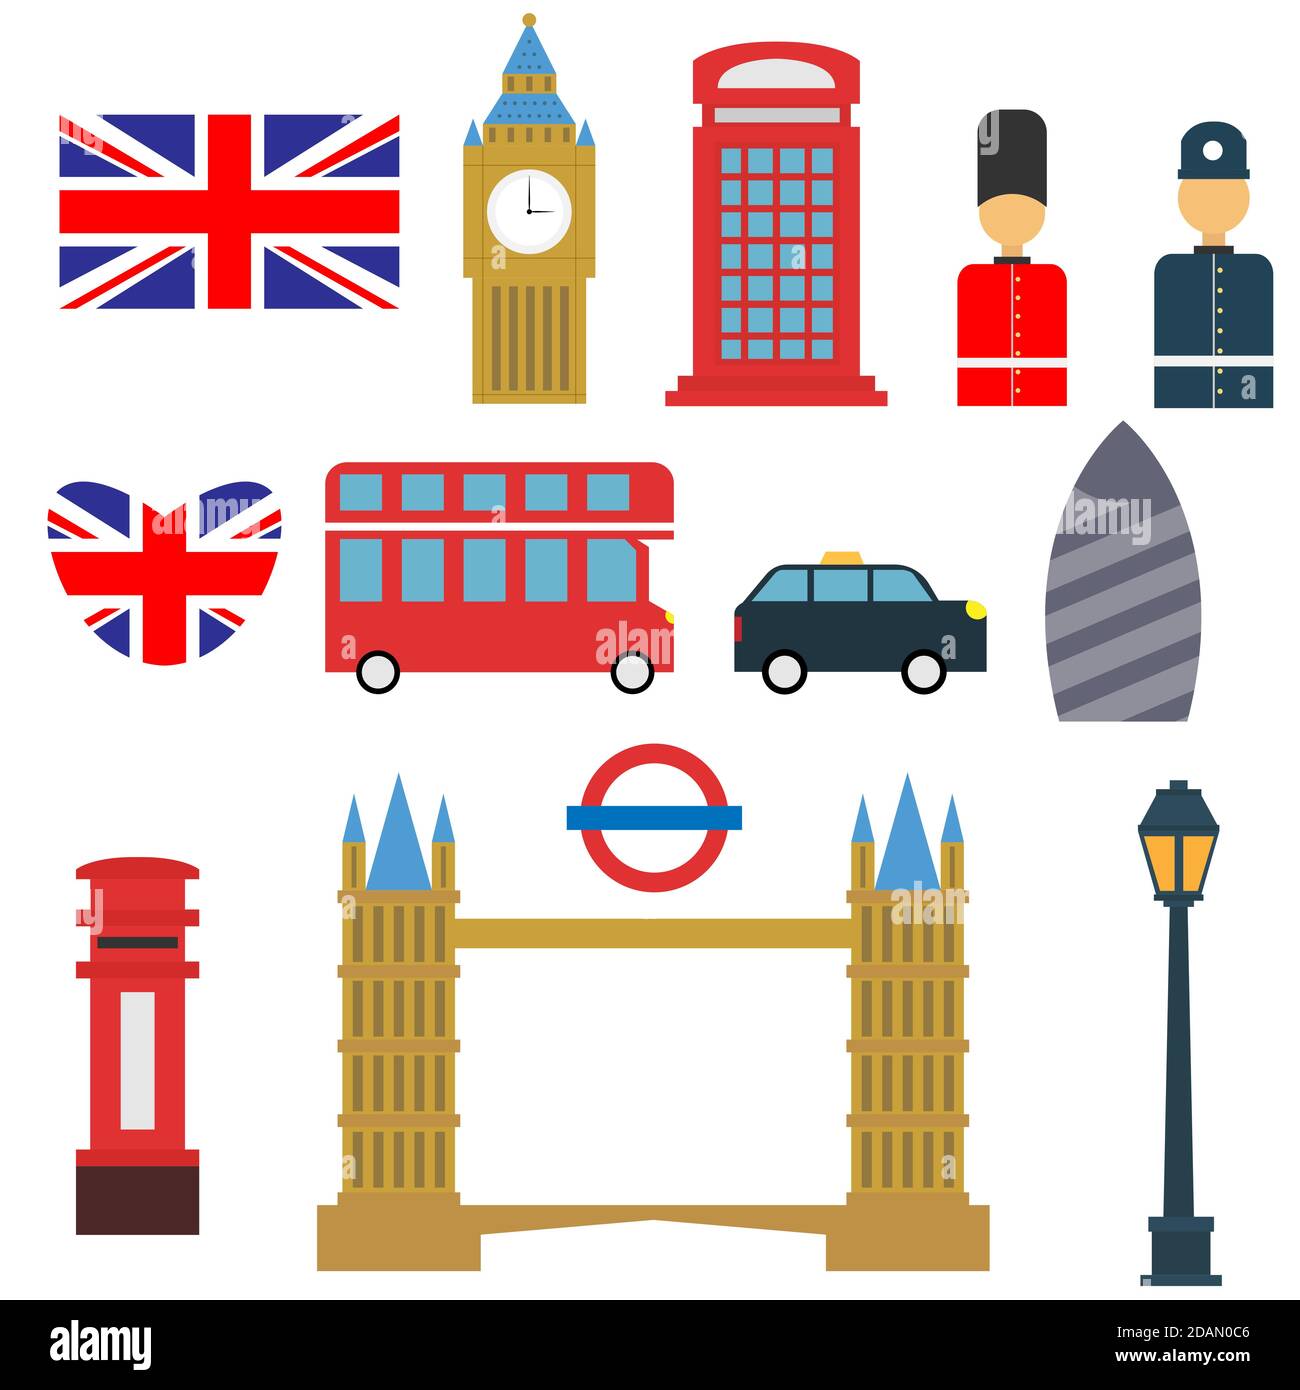 Illustration vector design of London symbol assets collection Stock Vector